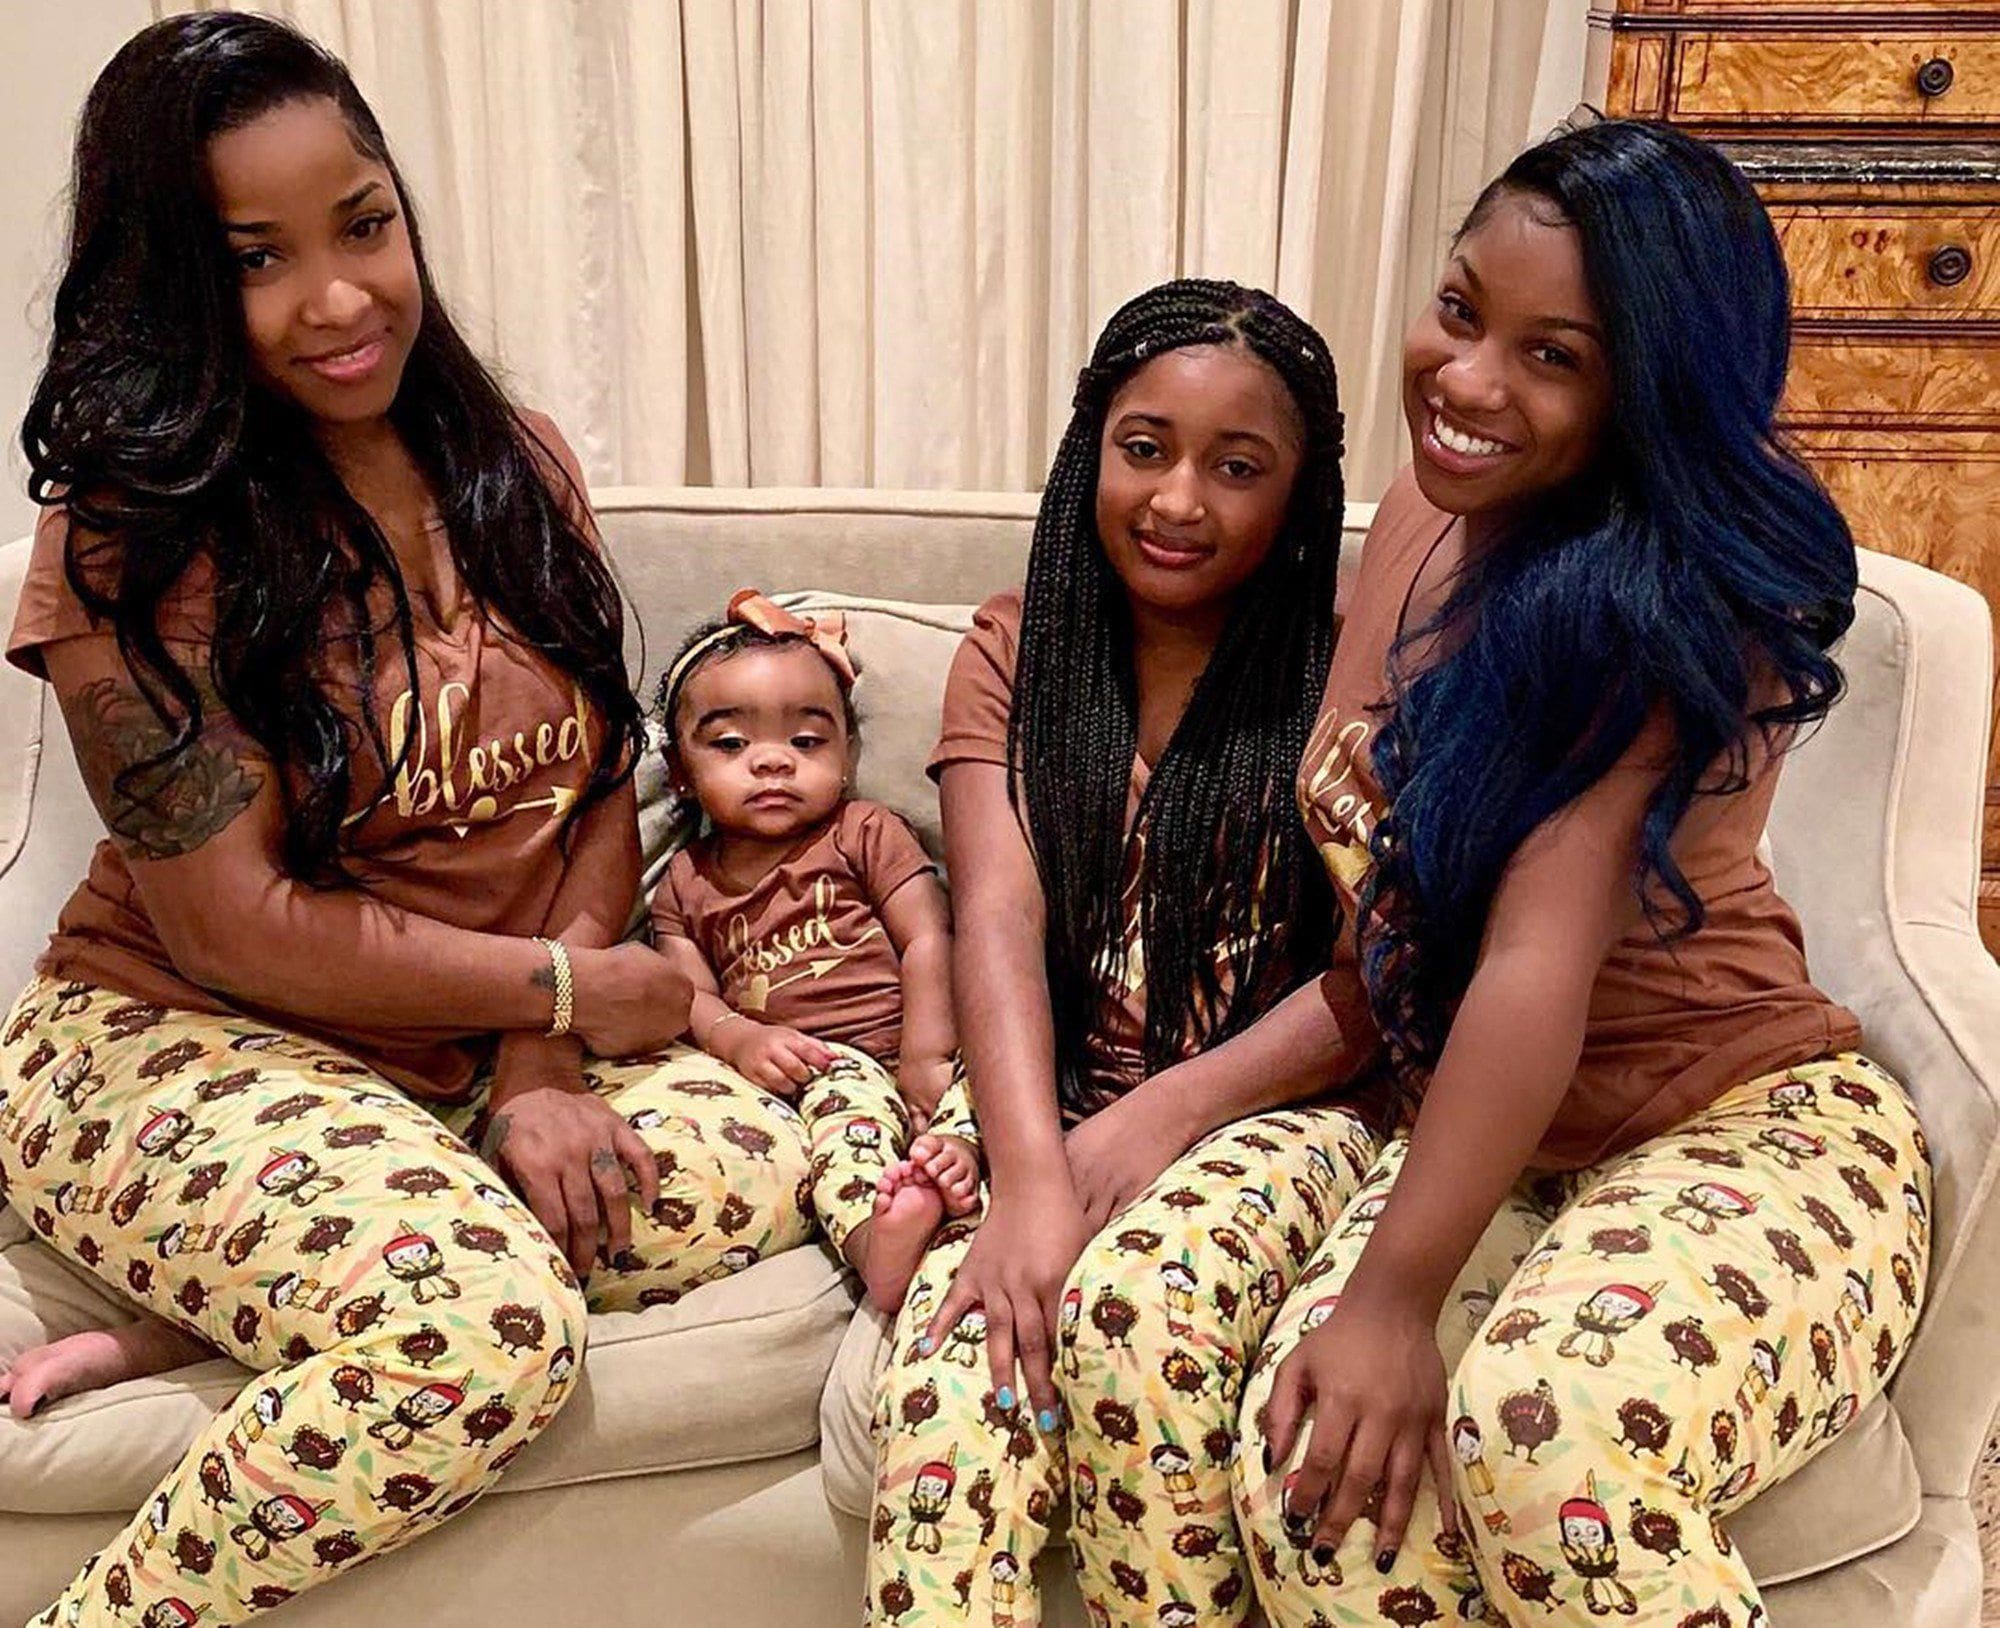 Toya Johnson's Daughter, Reign Rushing Looks Like She's Having The Time Of Her Life With Her Cousin, Jashae